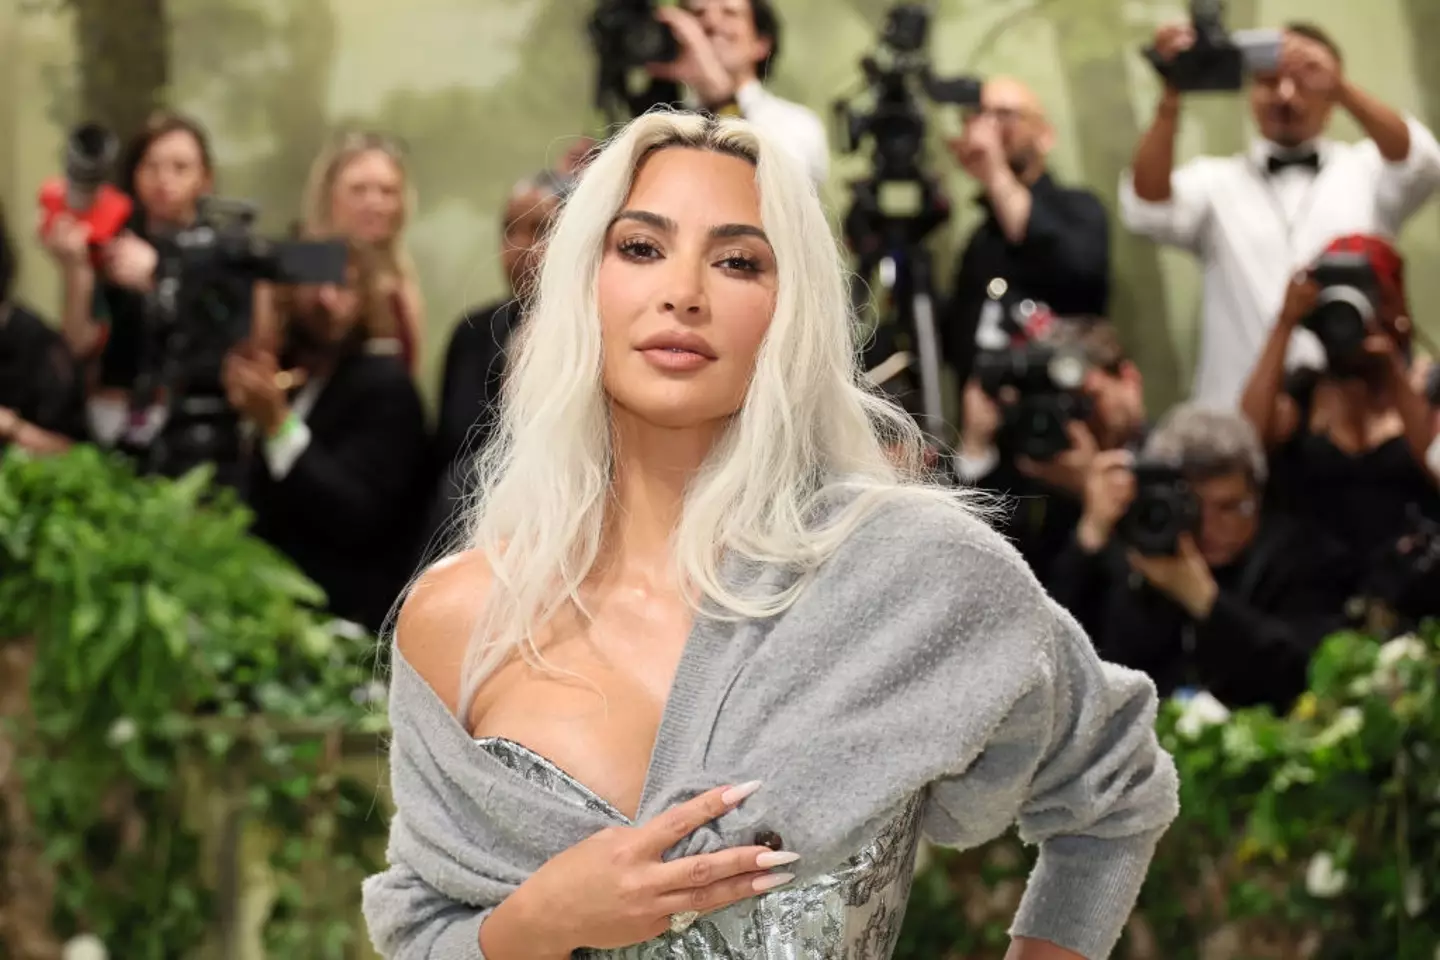 People are worried about Kim Kardashian's Met Gala outfit (Dia Dipasupil/Getty Images)